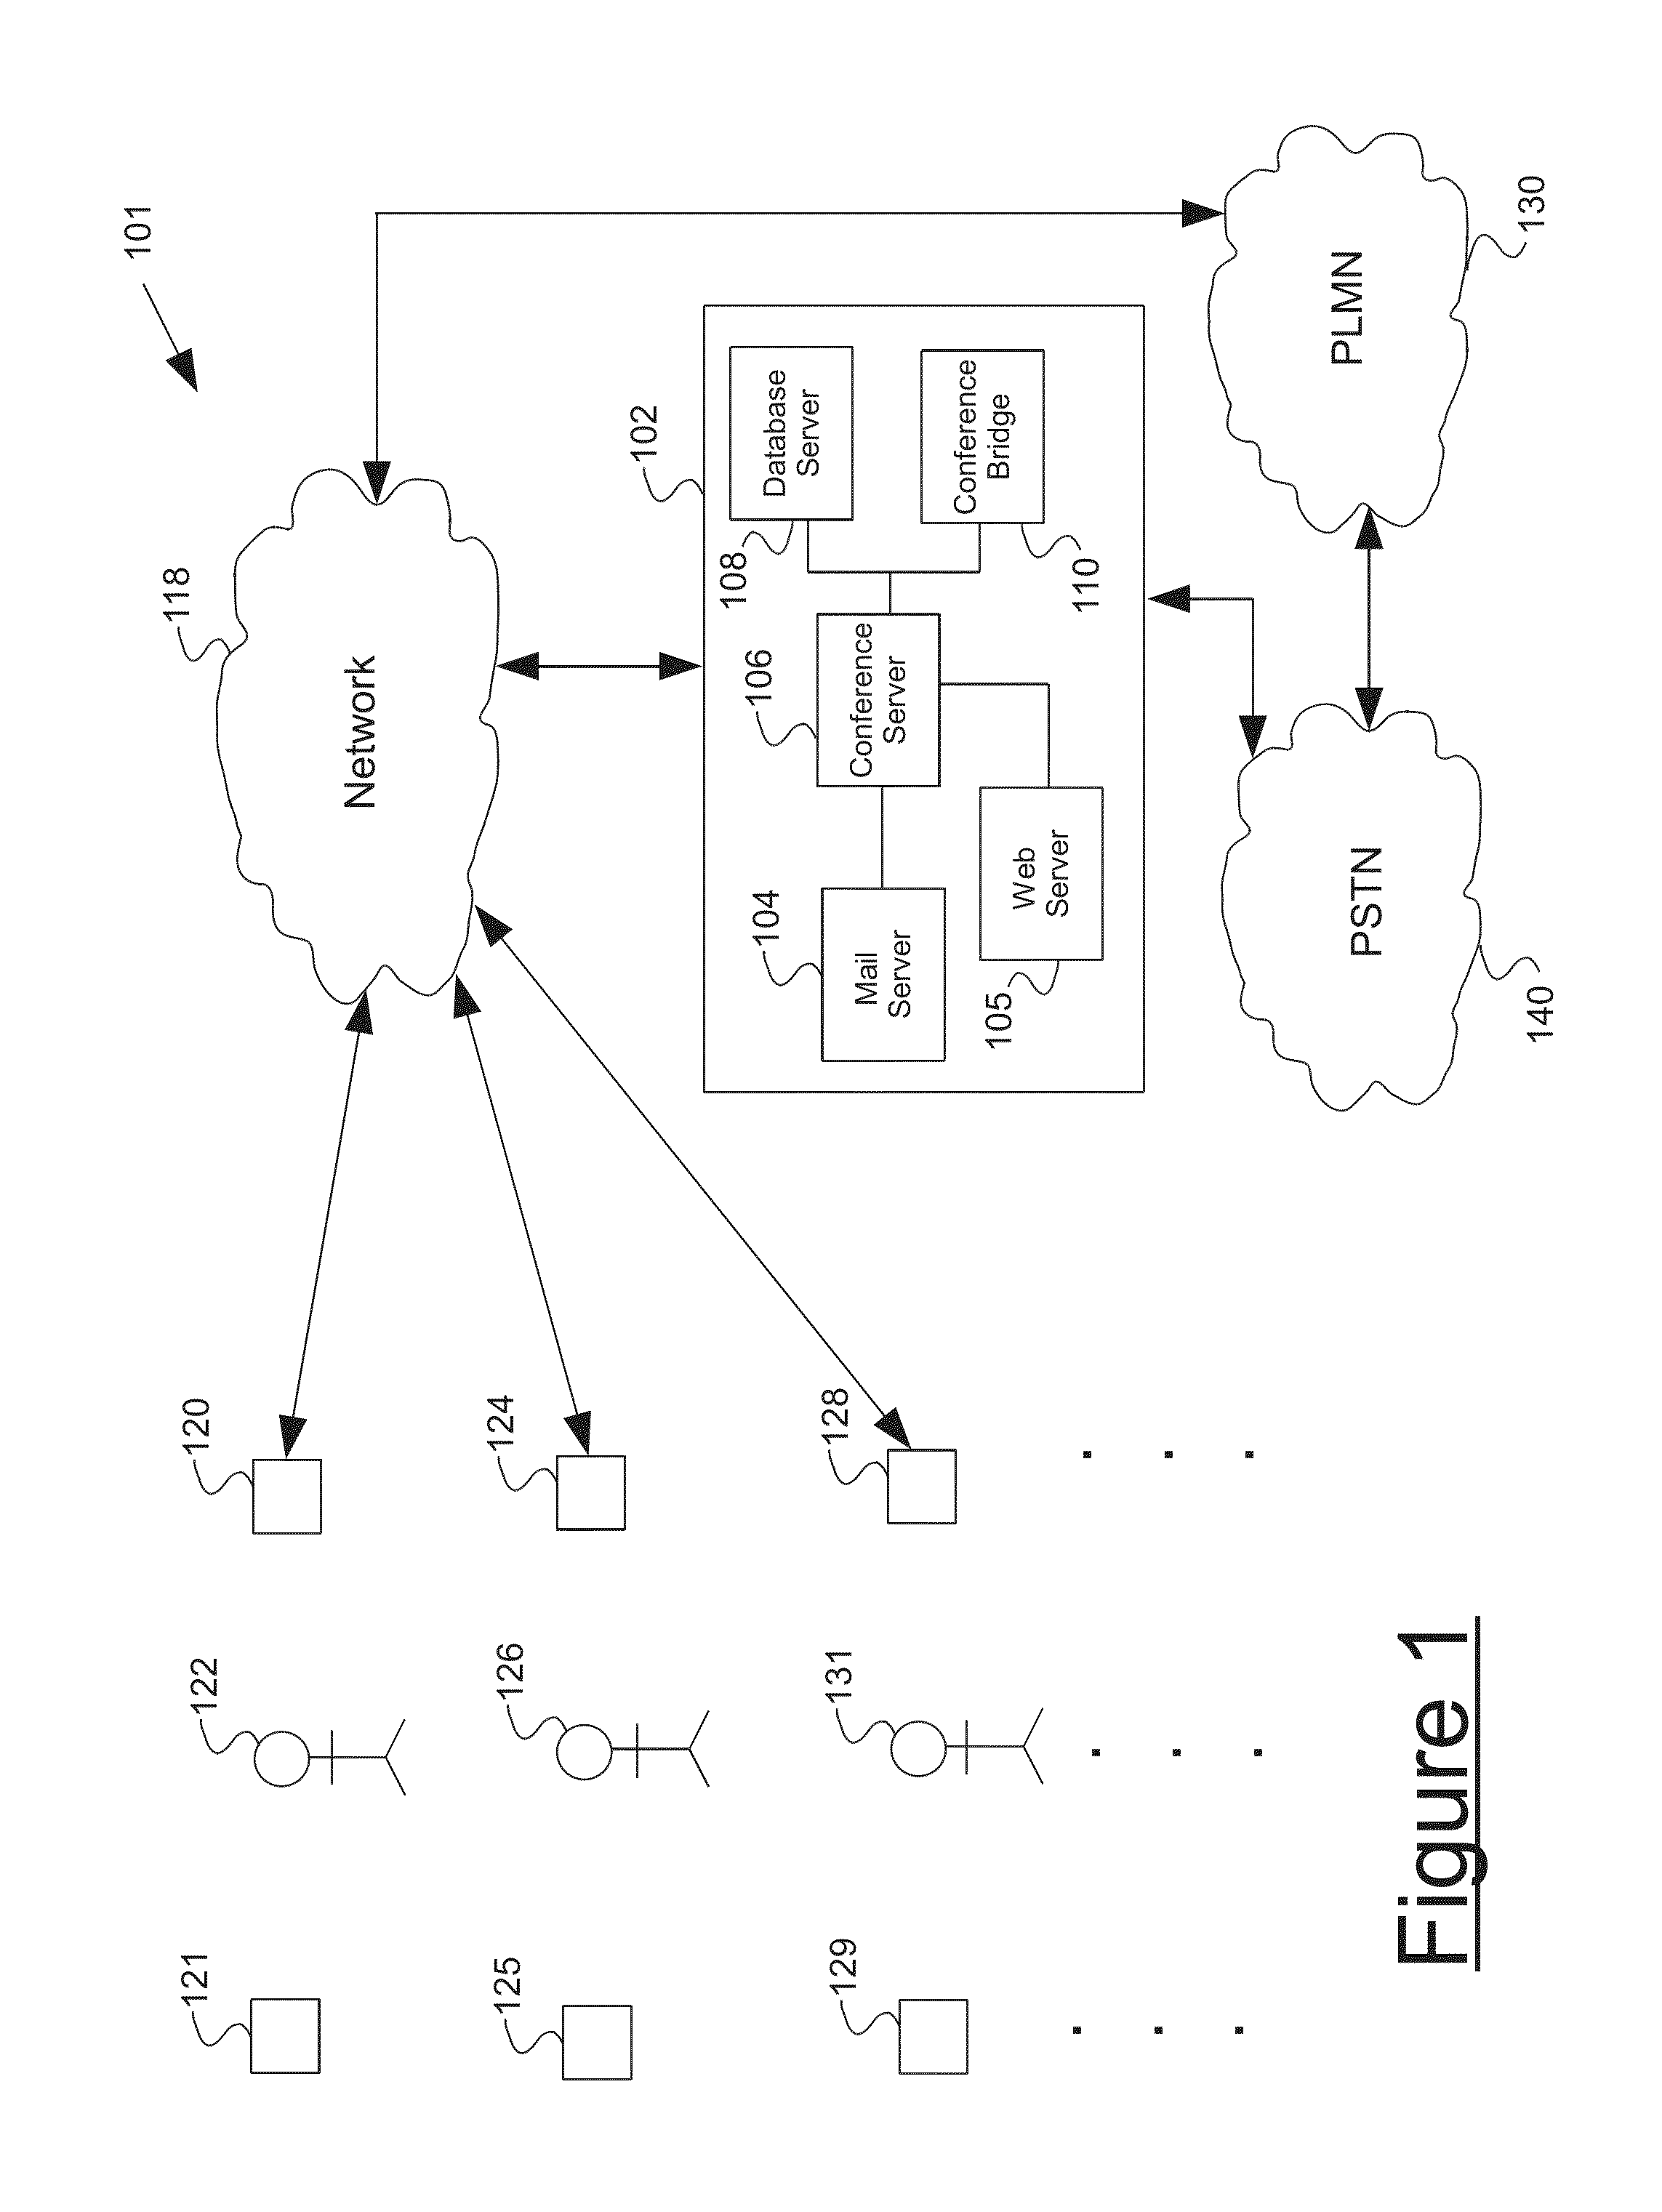 System and Method of Routing Conference Call Participants